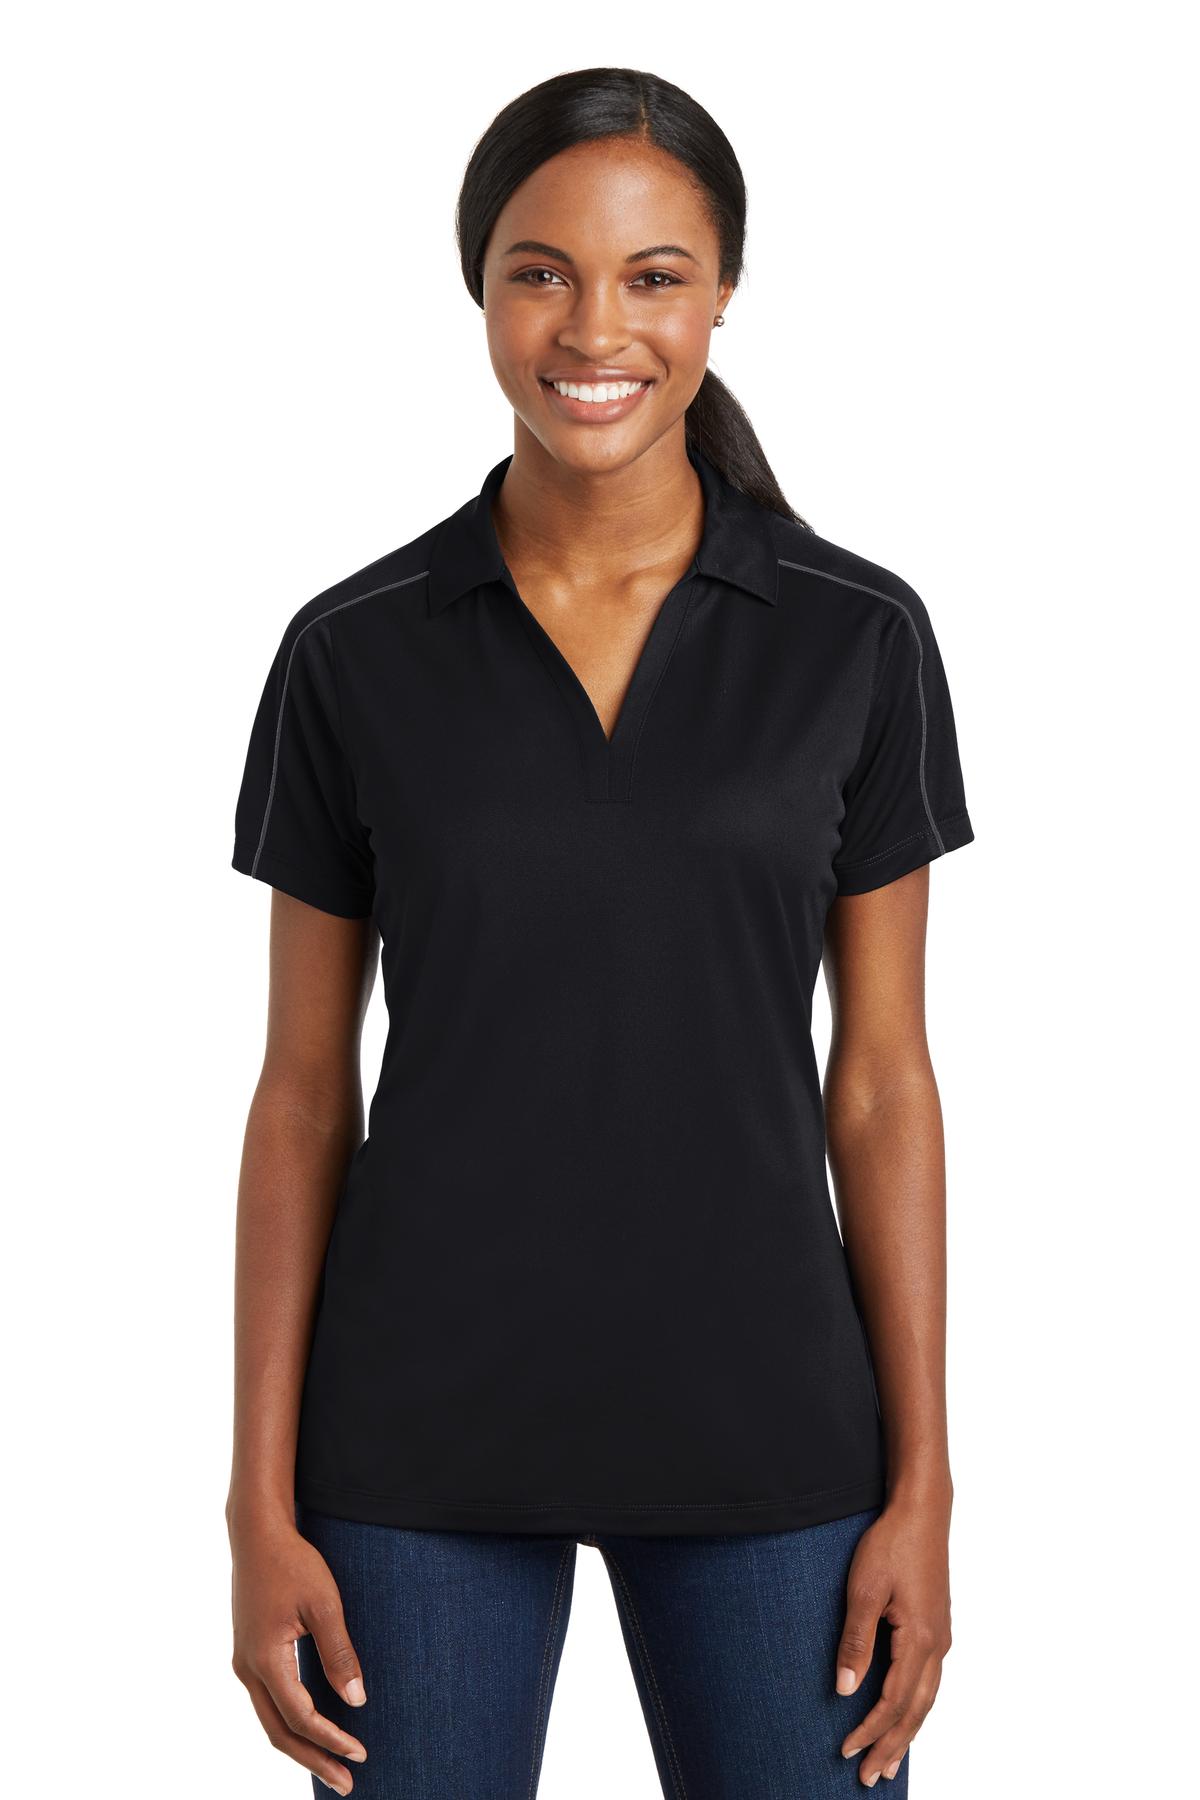 Sport-Tek Ladies Micropique Sport-Wick Piped Polo - LST653